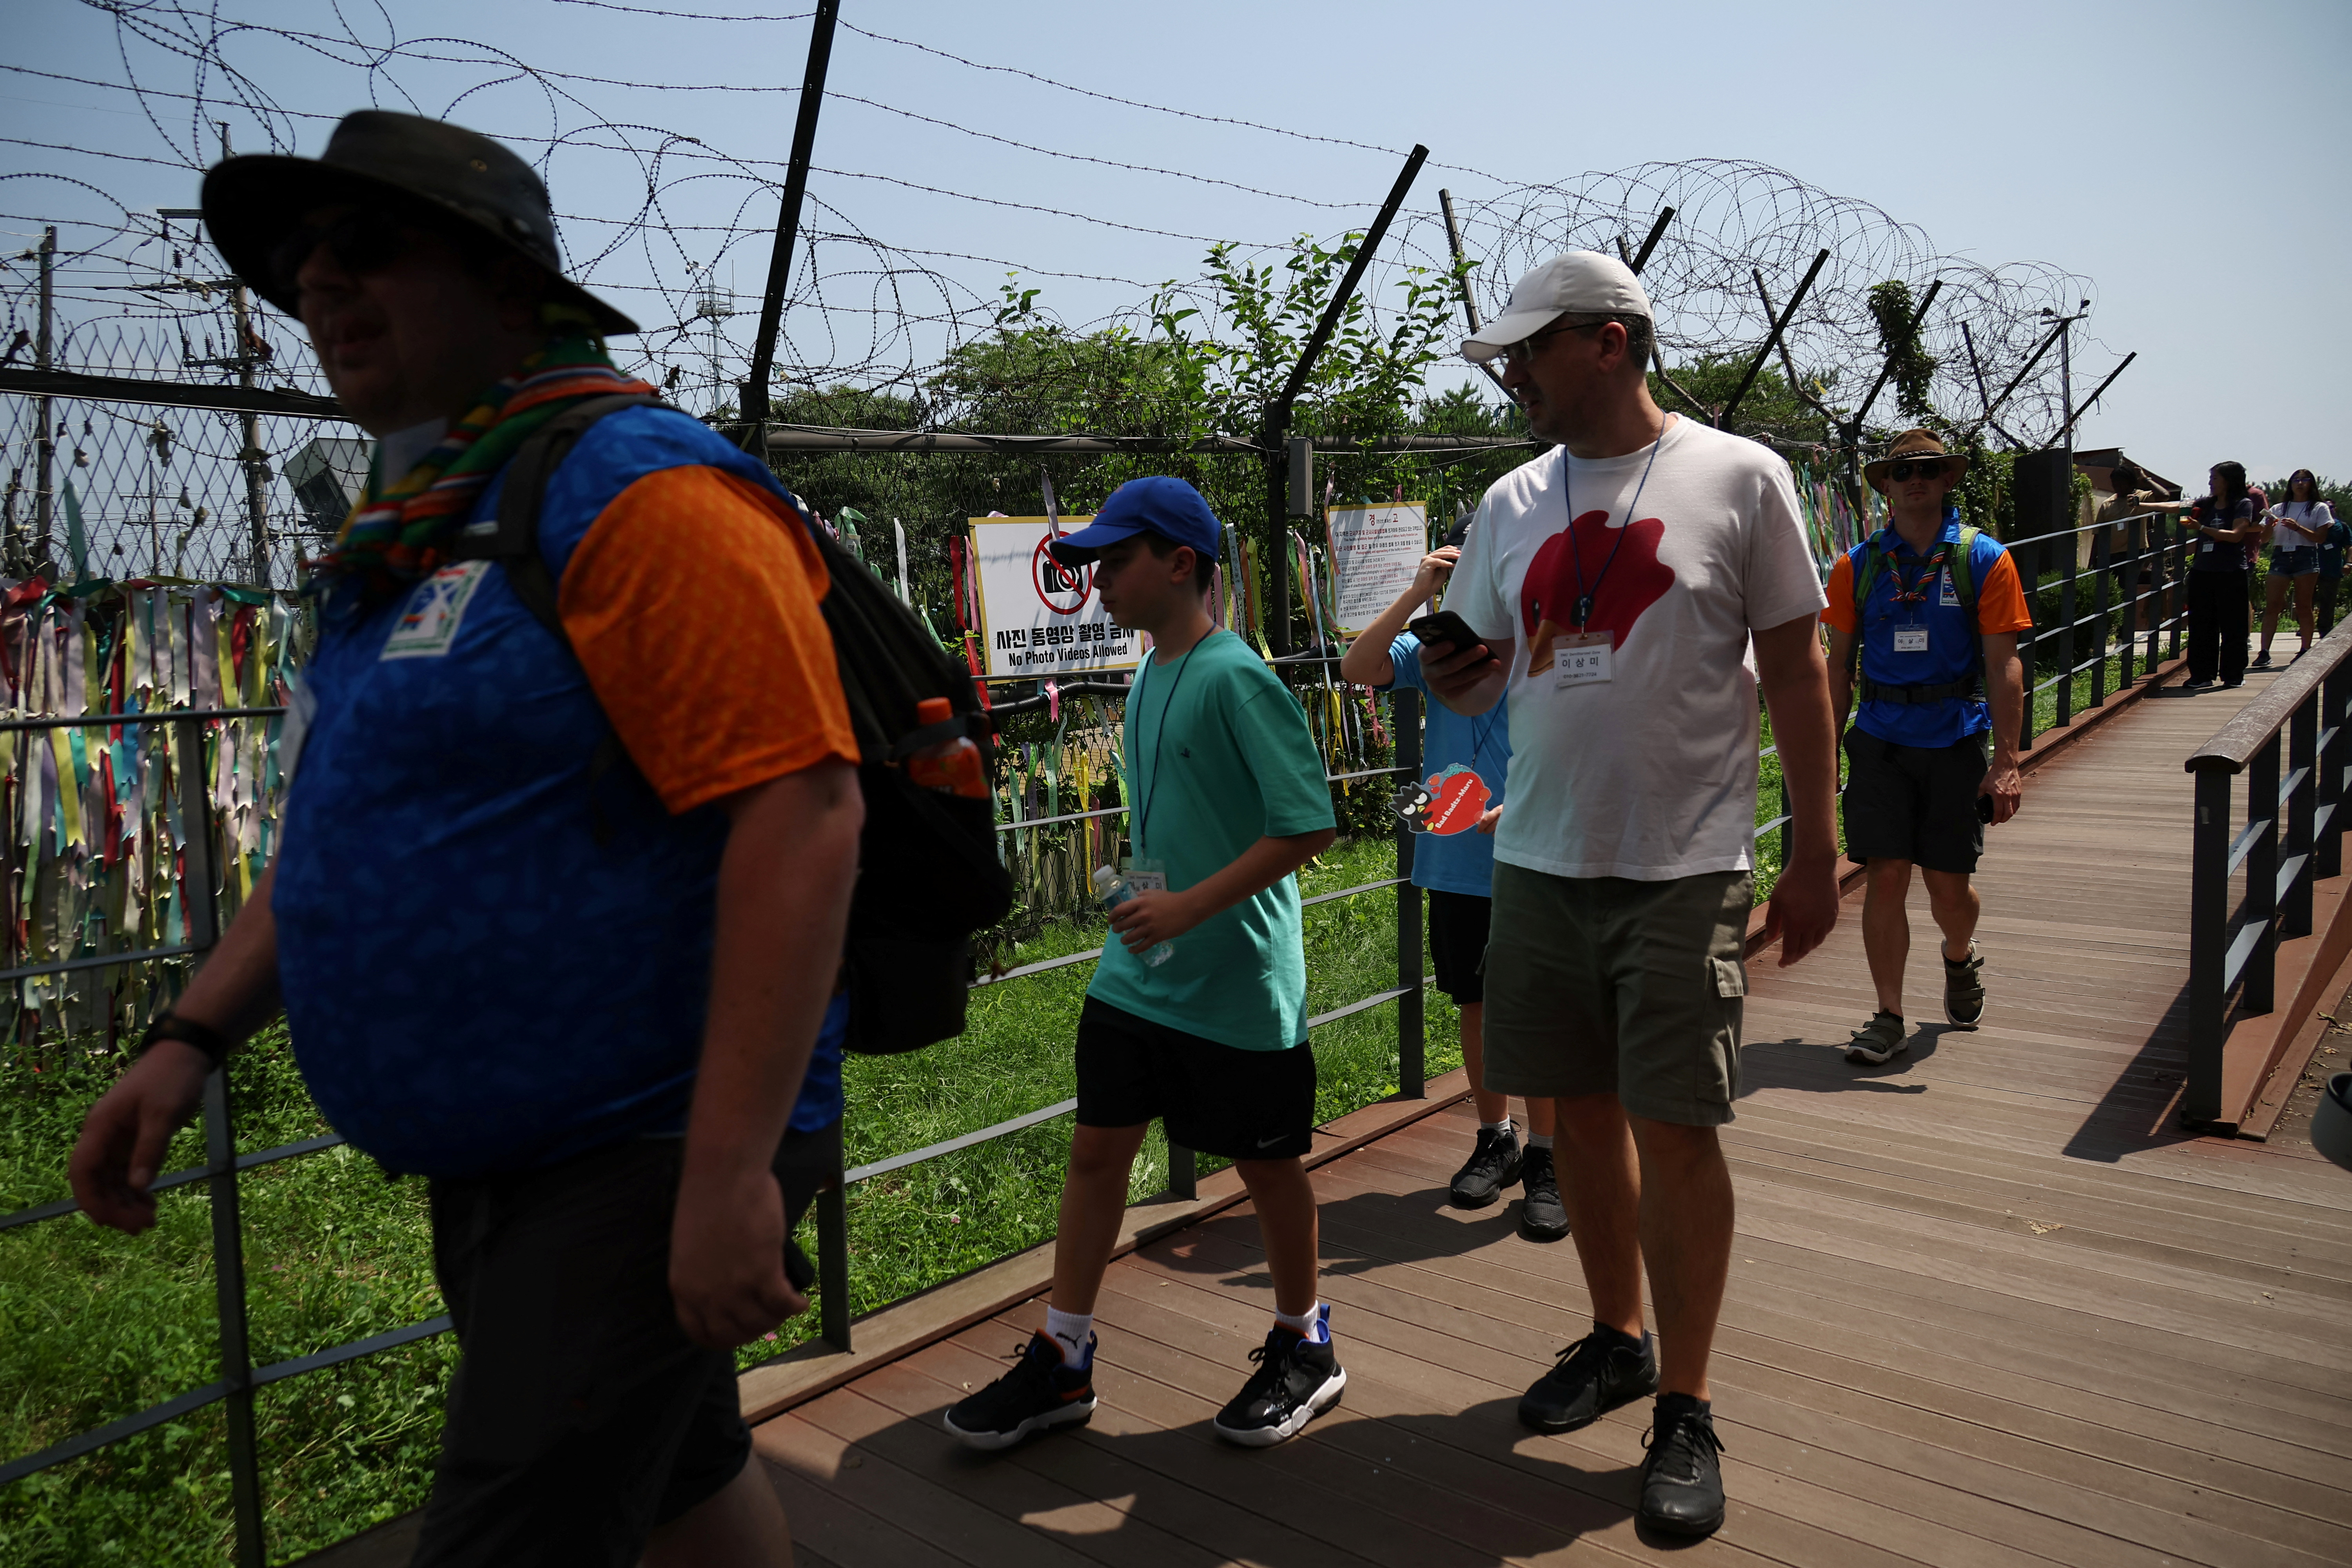 Foreign tourists participating in DMZ tour walk past a military fence near the demilitarized zone separating the two Koreas, in Paju